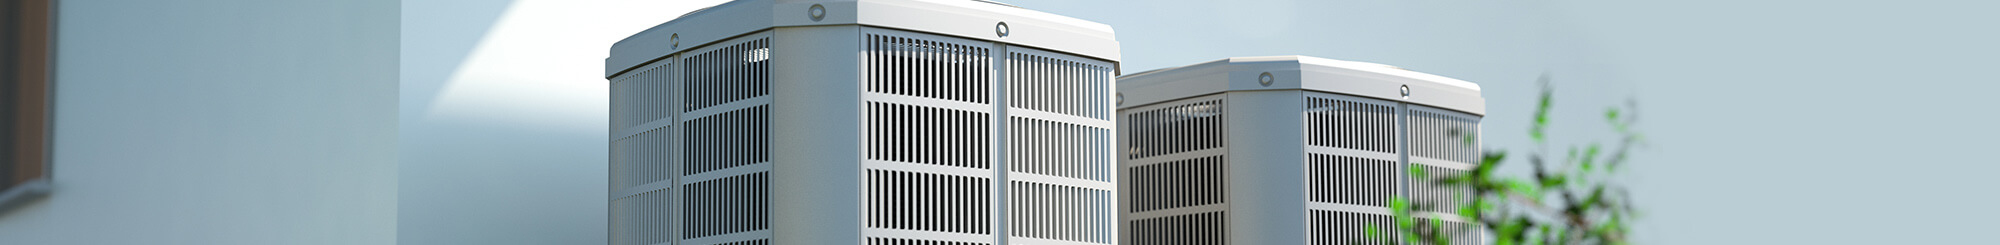 cooling system repair service in Wales, WI